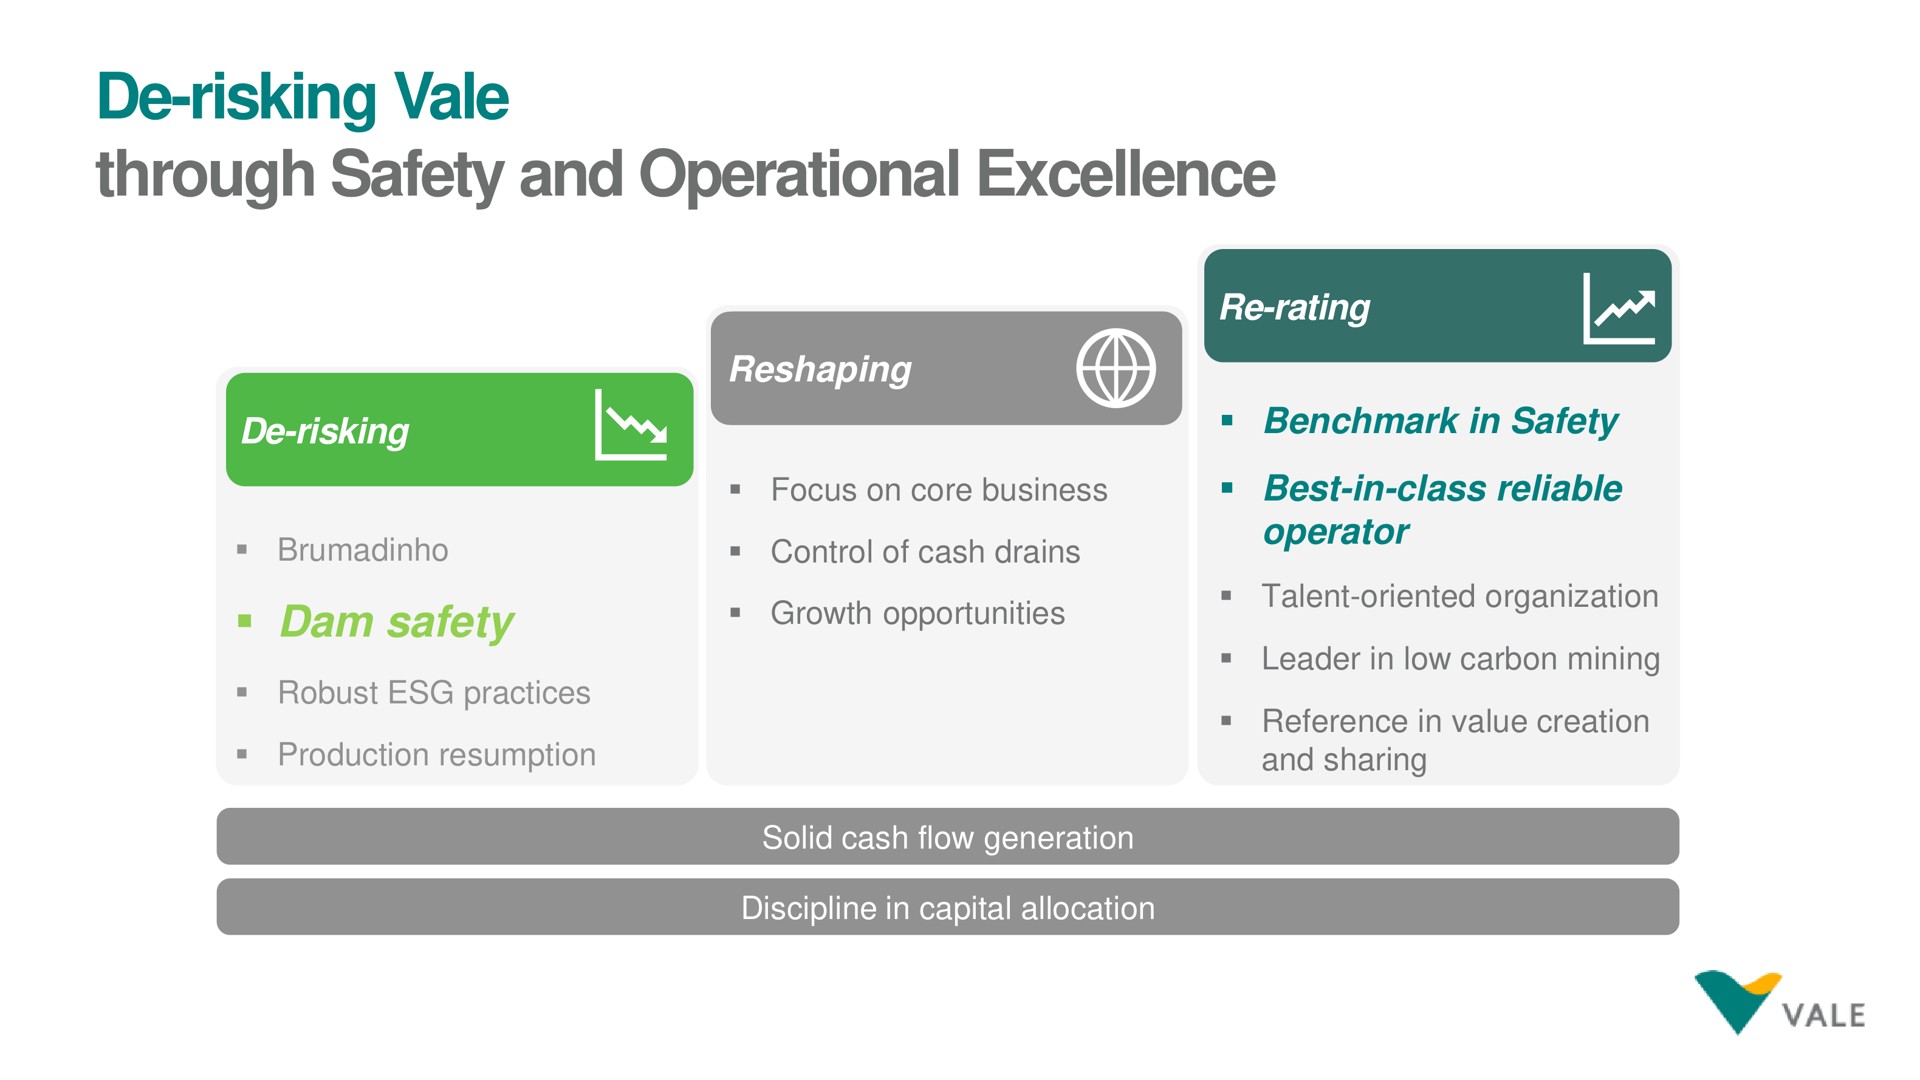 risking vale through safety and operational excellence | Vale